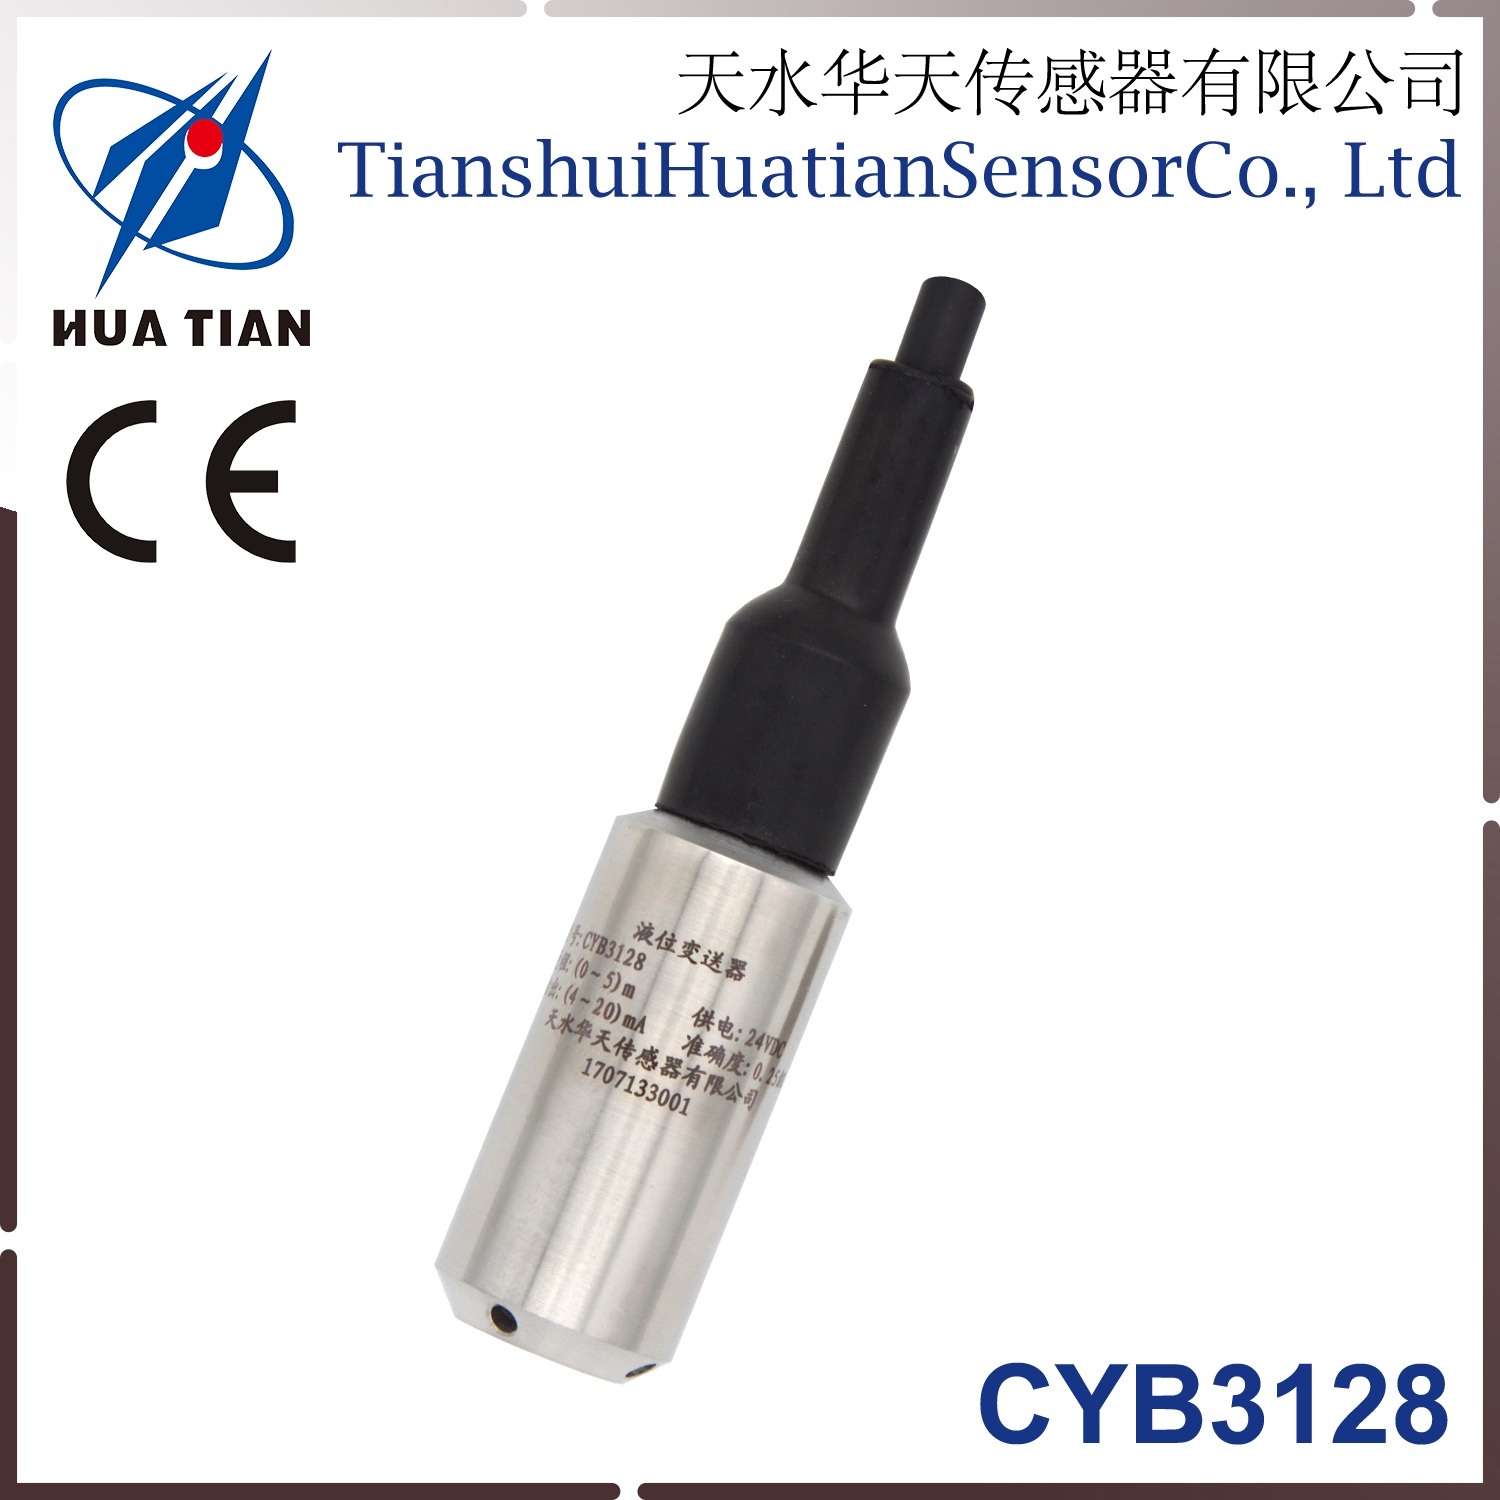 Cyb3128 Small Size Submersible Level Transmitter